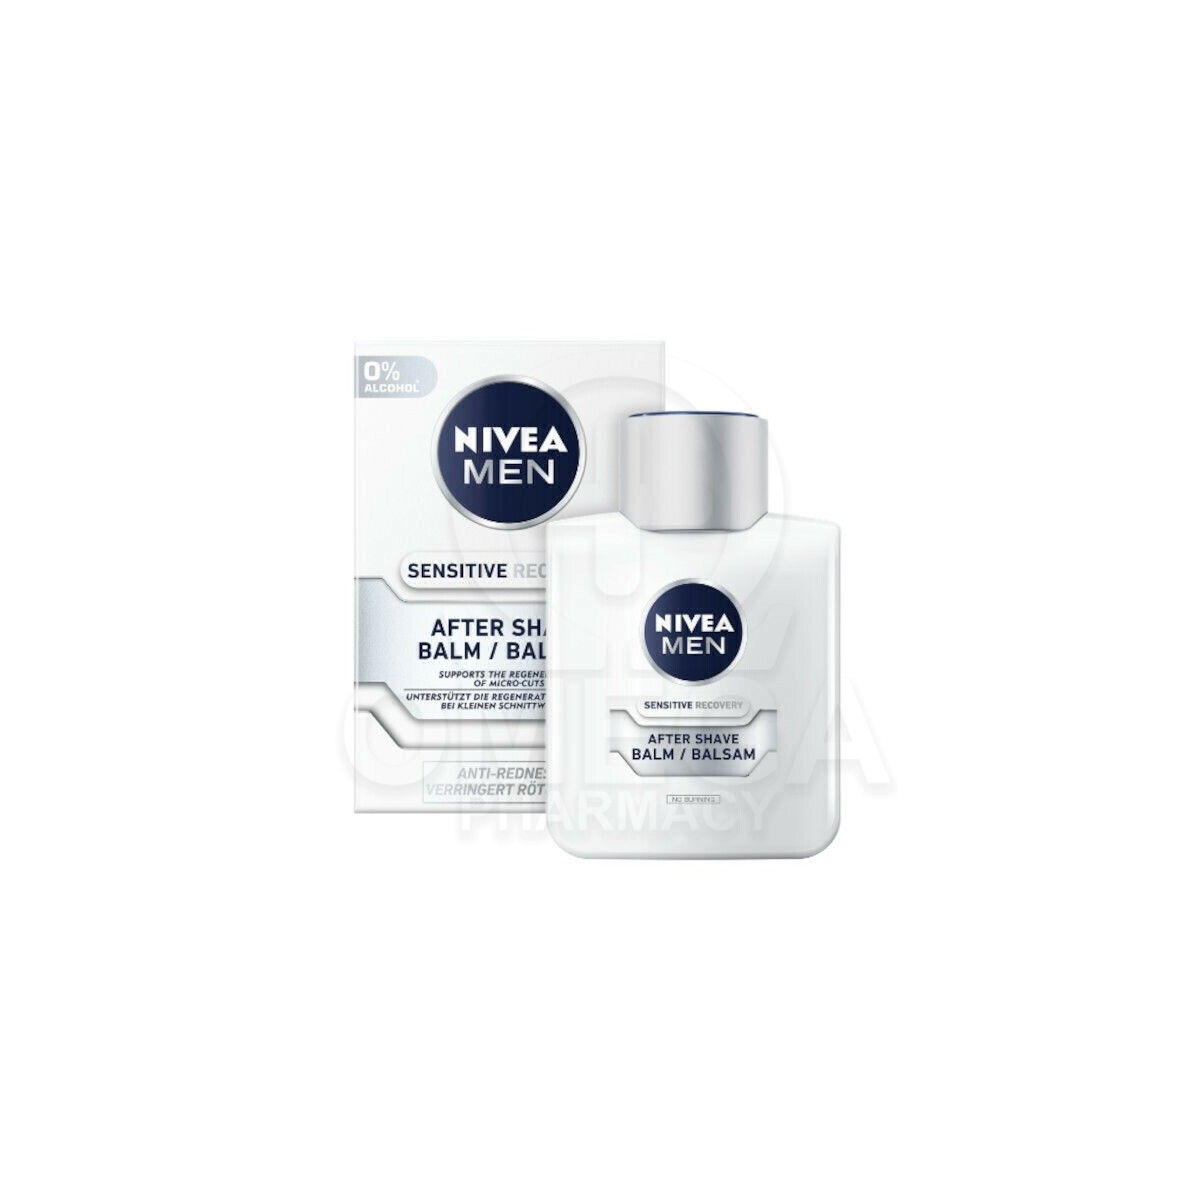 NIVEA Men Sensitive Recovery After Shave Balm 100ml